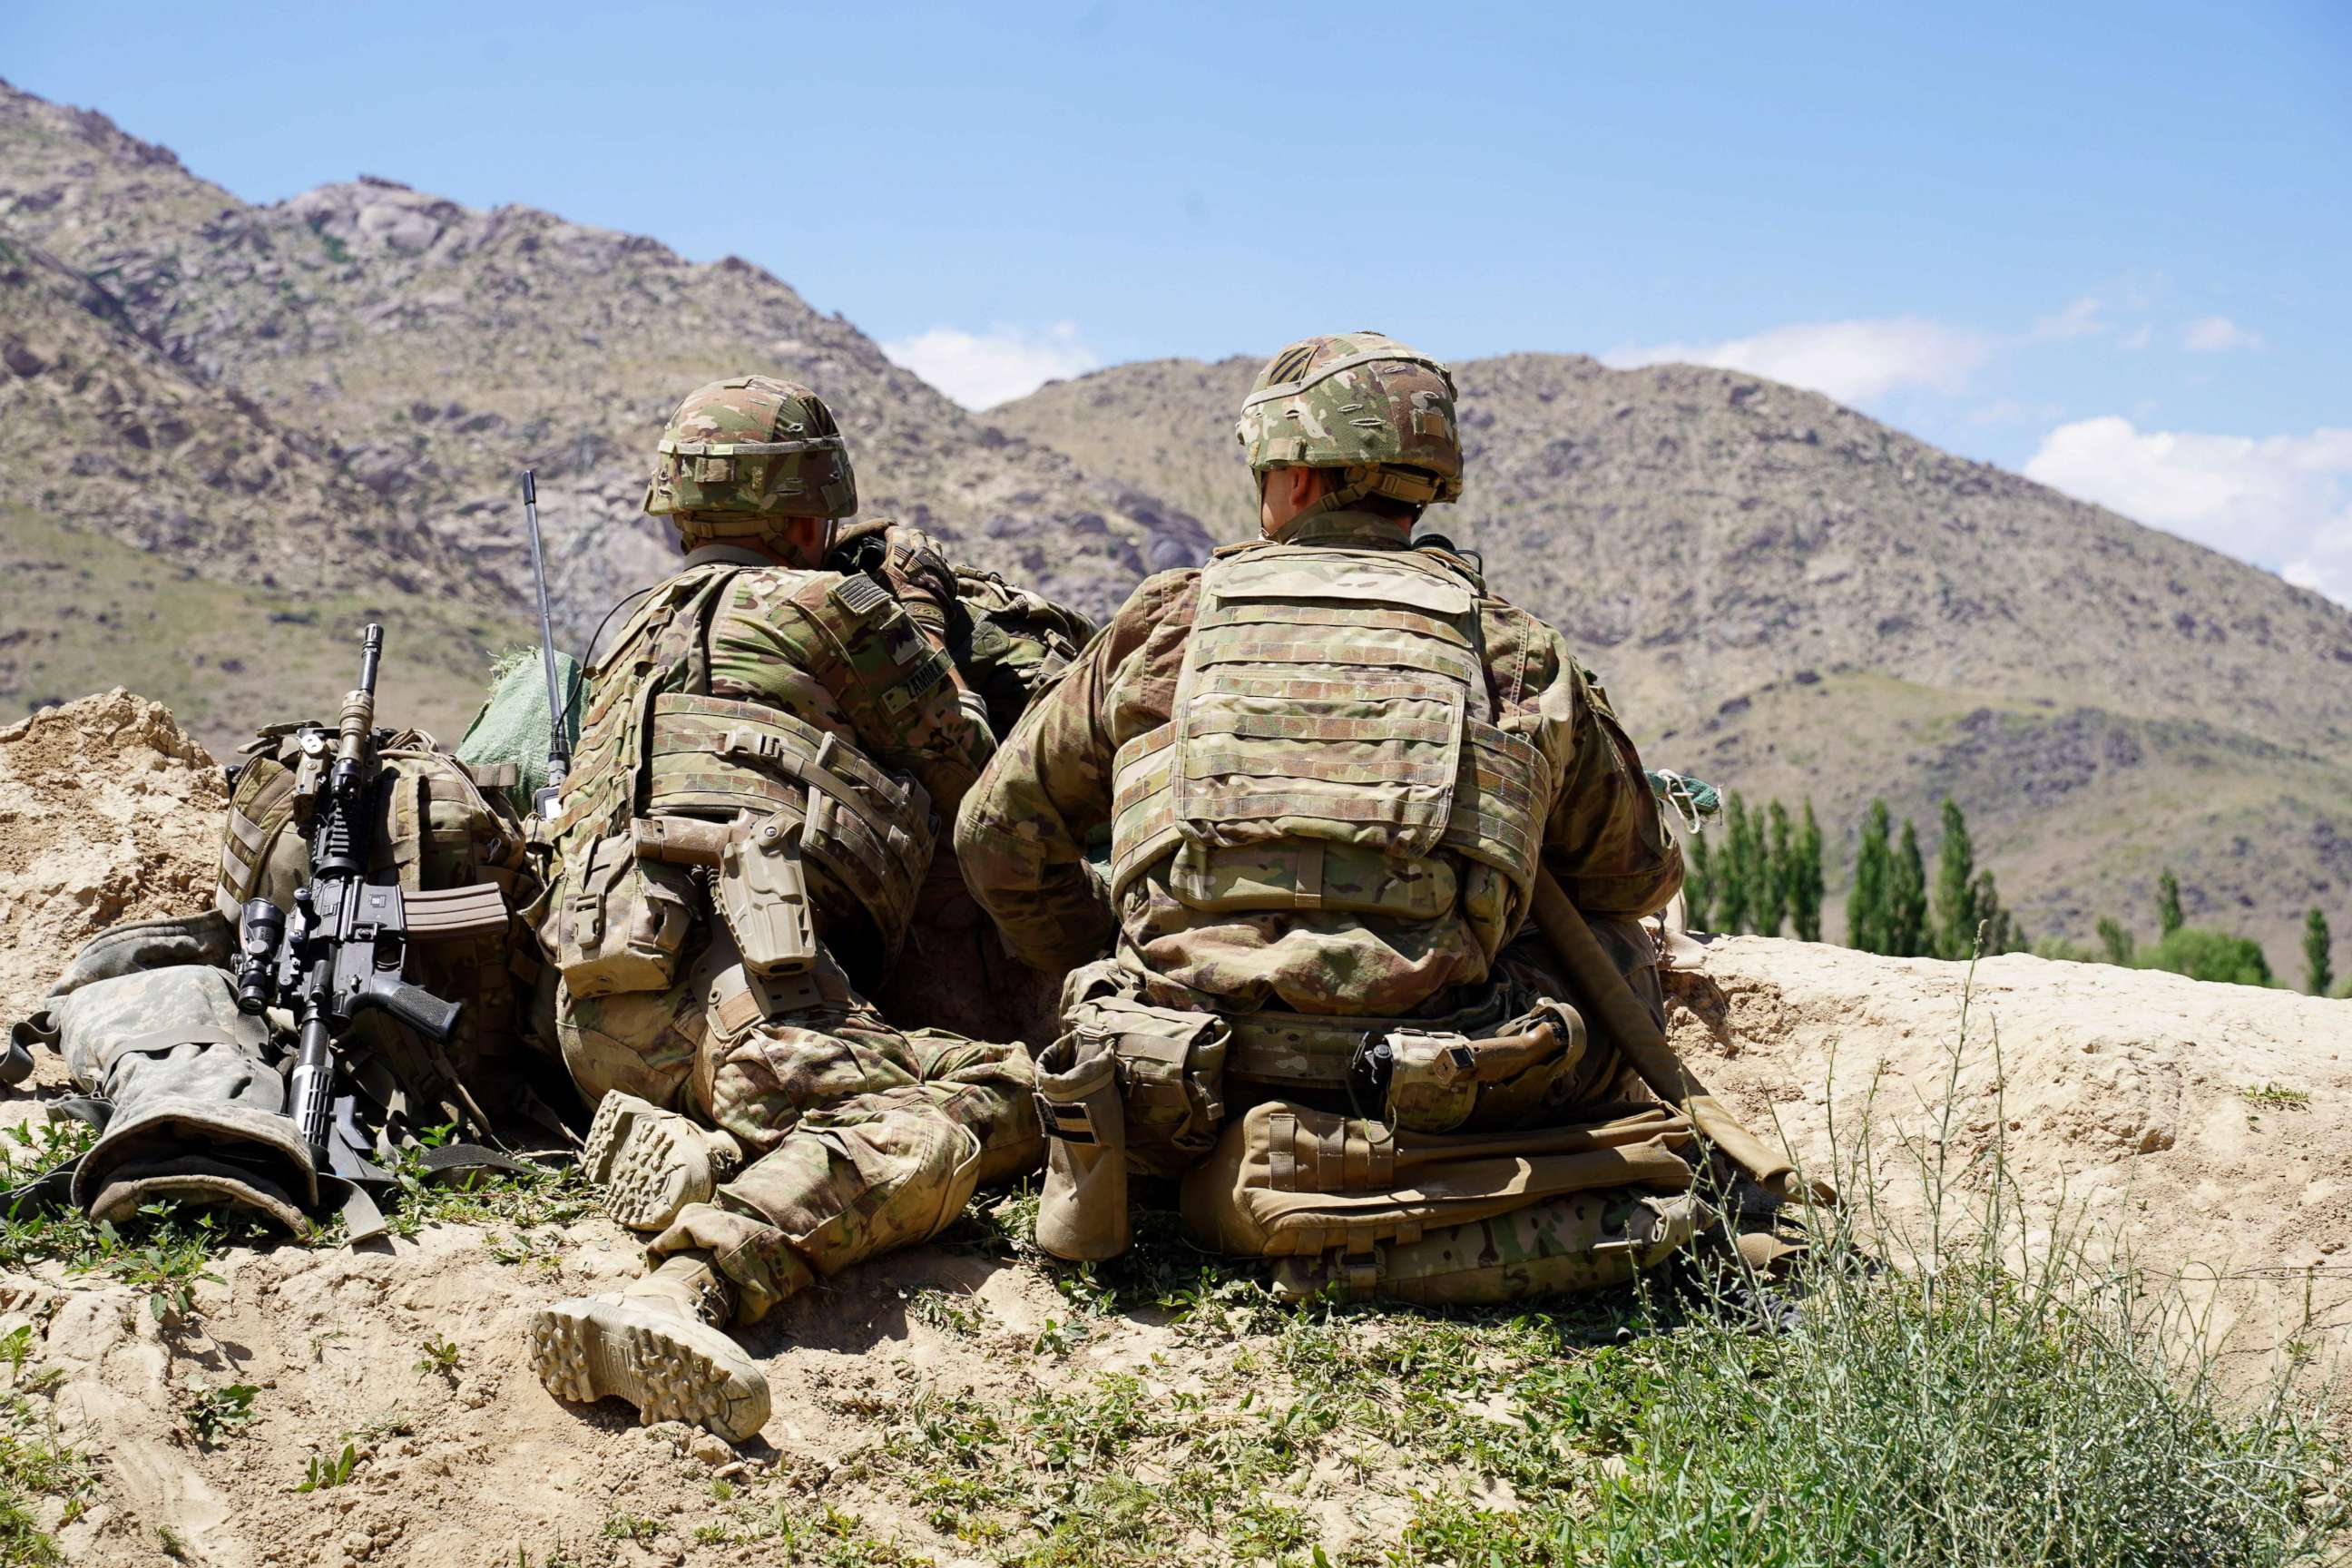 PHOTO: In this photo taken on June 6, 2019, US soldiers look out over hillsides during a visit of the commander of US and NATO forces in Afghanistan General Scott Miller at the Afghan National Army (ANA) checkpoint in Nerkh district of Wardak province.